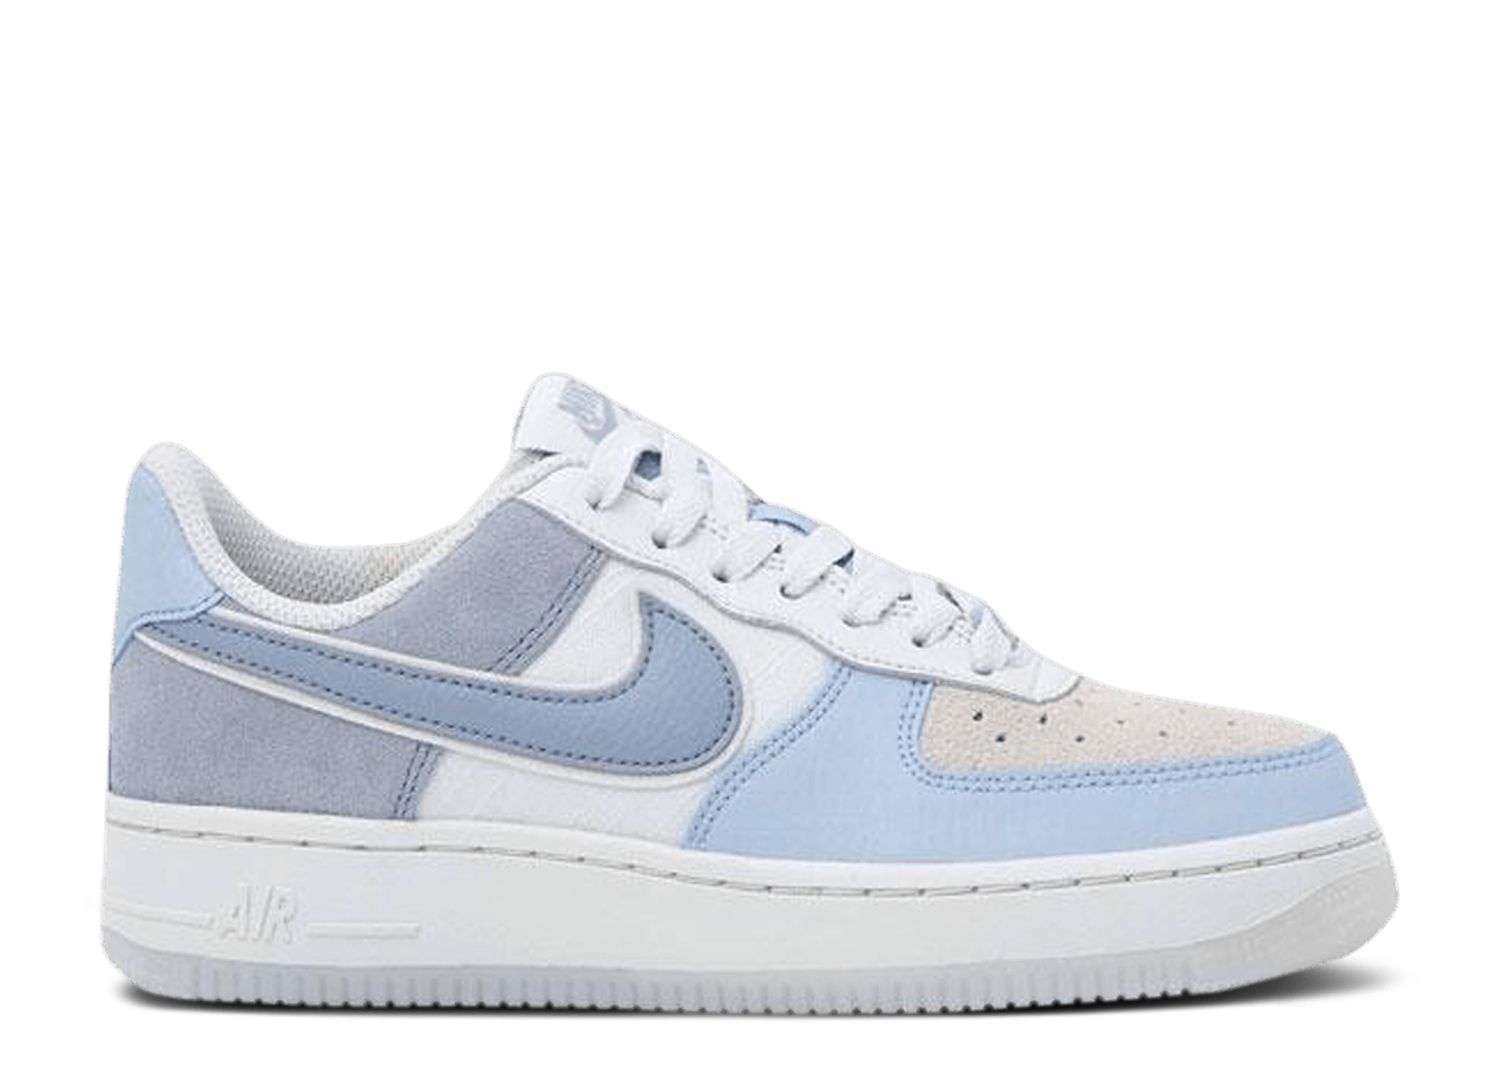 Wmns Air Force 1 Low Premium 'Light Armory Blue' - Nike - 896185 401 ...